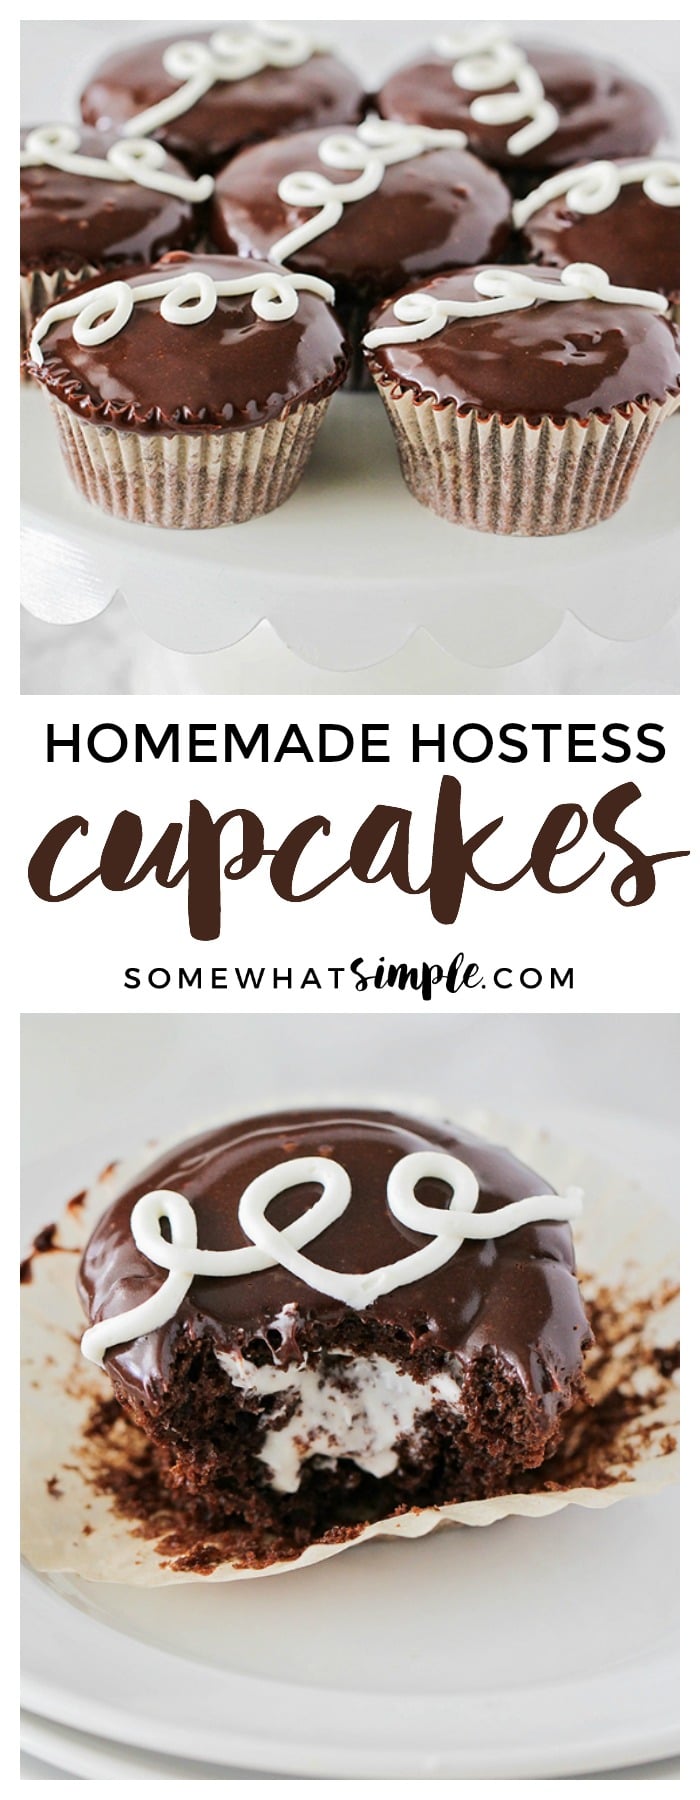 Easiest Homemade Hostess Cupcakes Recipe Somewhat Simple